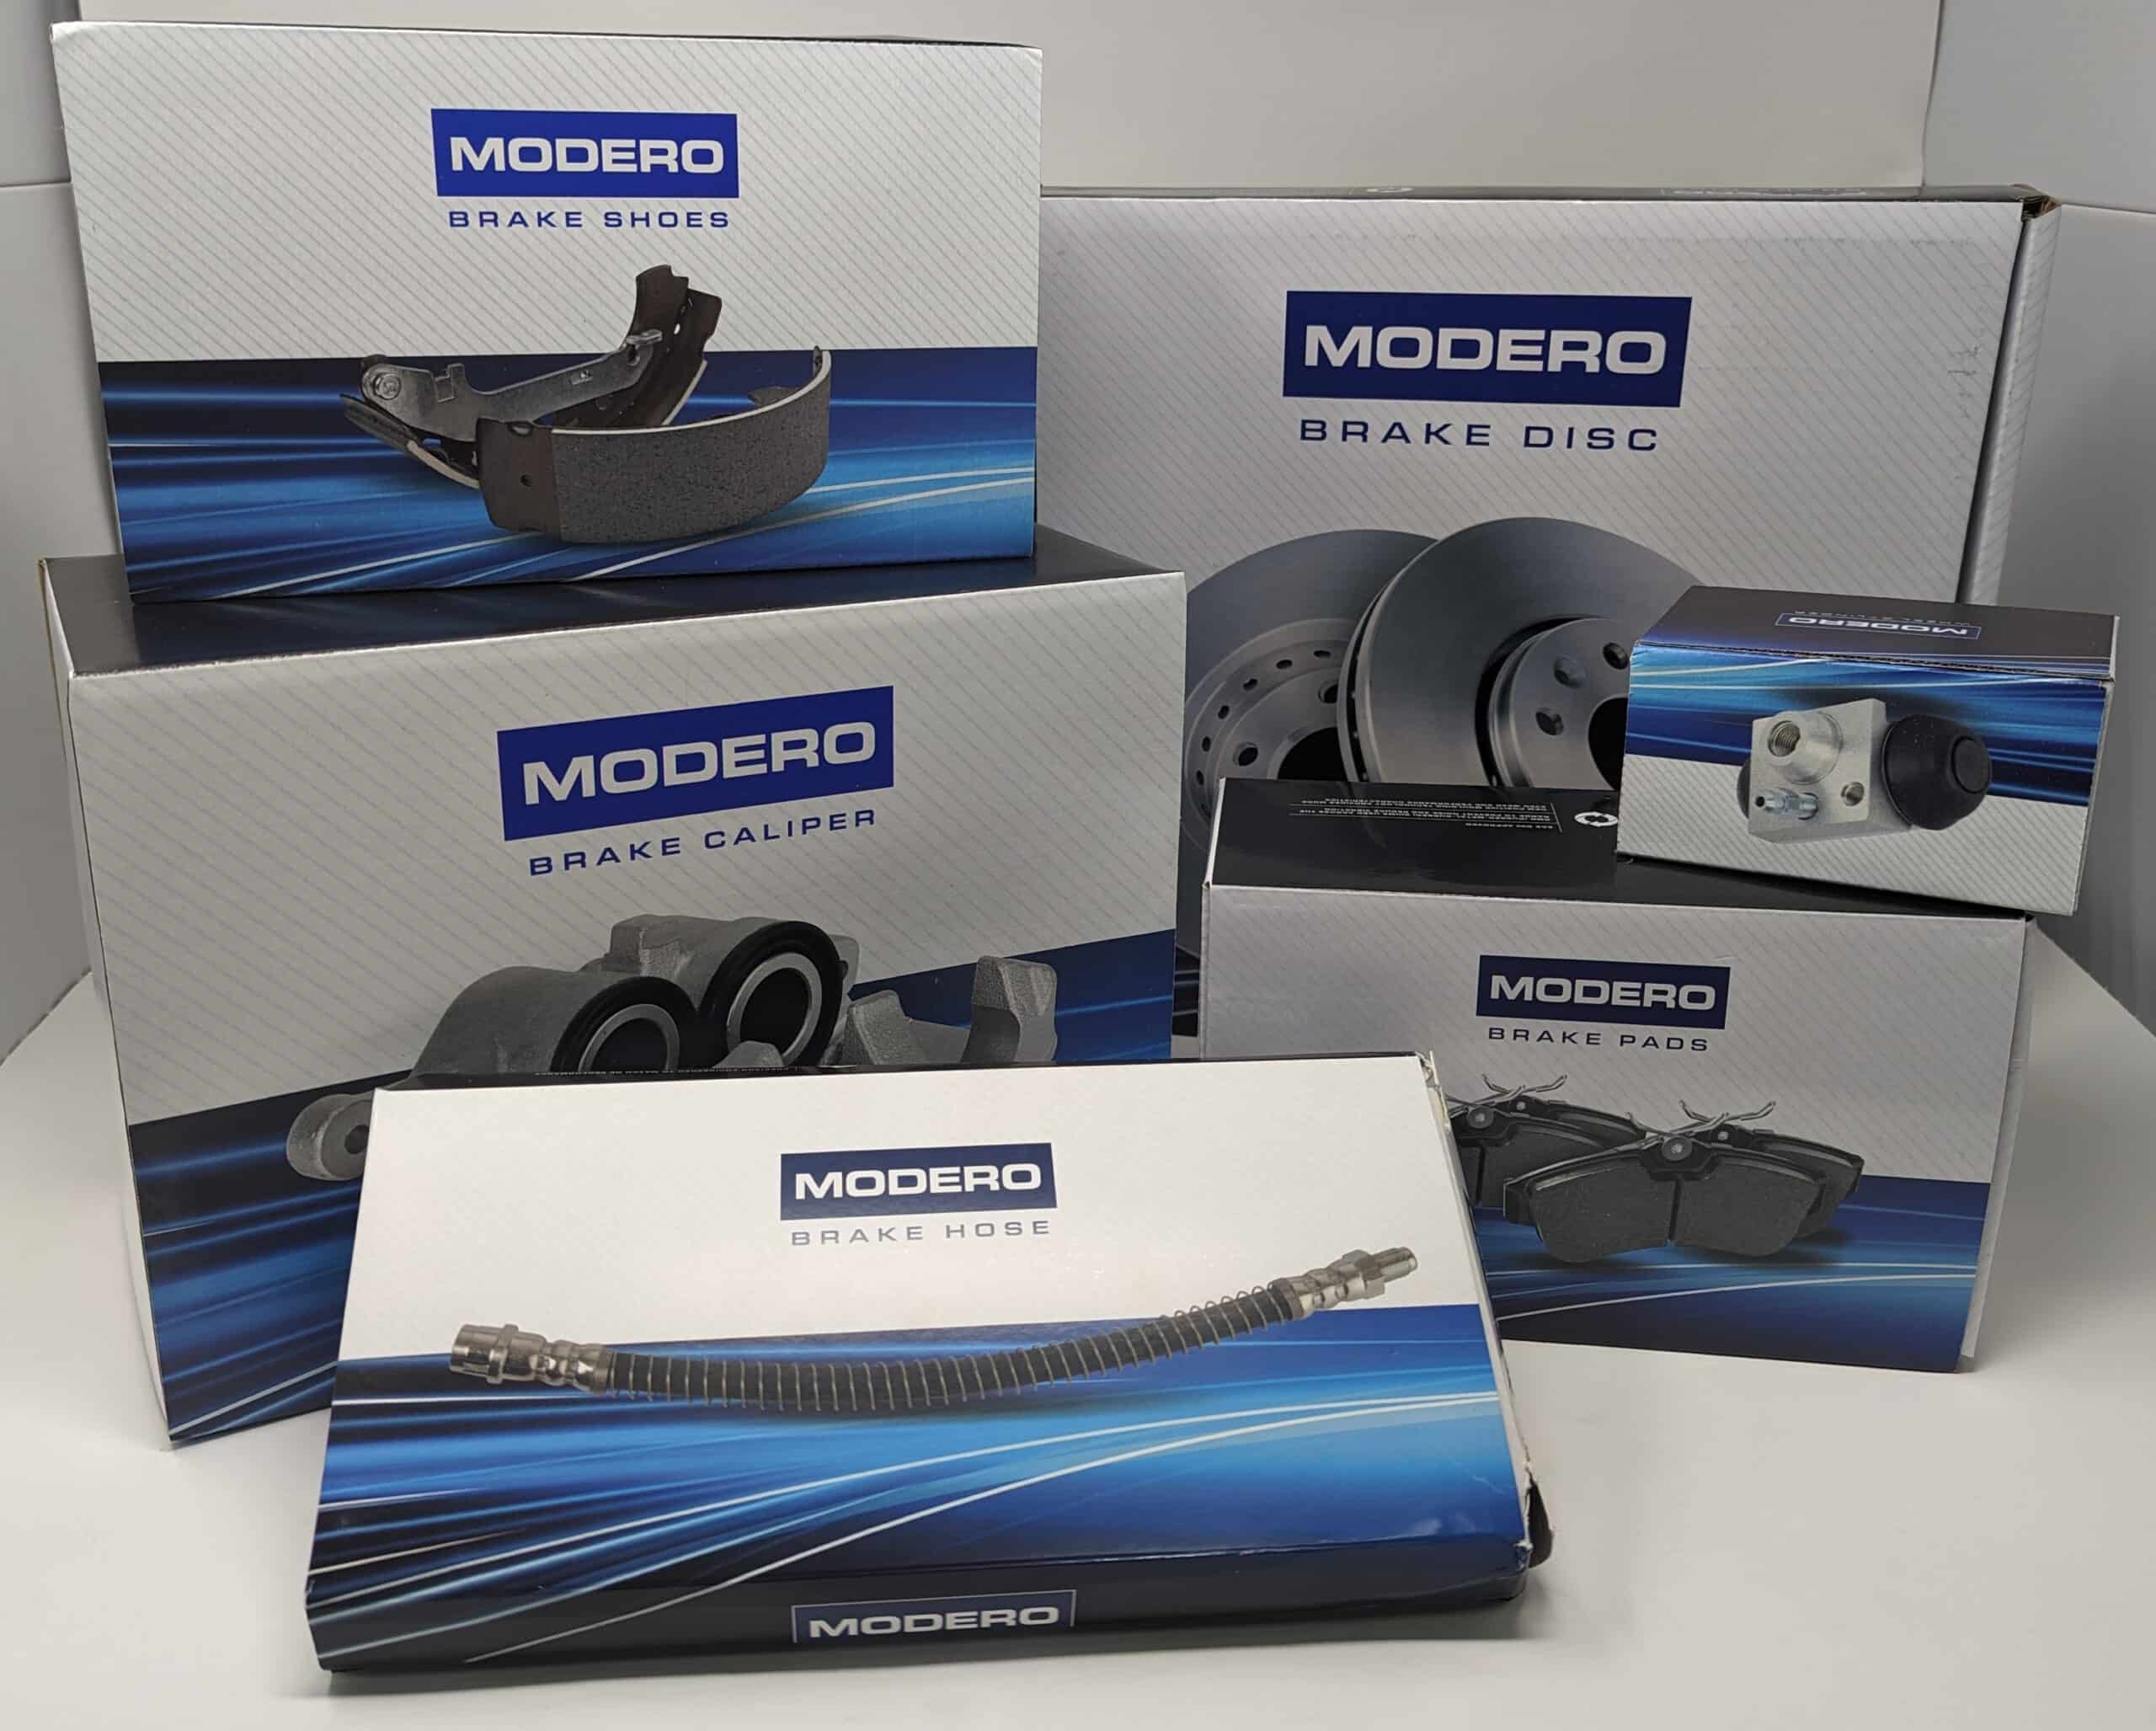 The IFA has expanded its Modero range of brake components